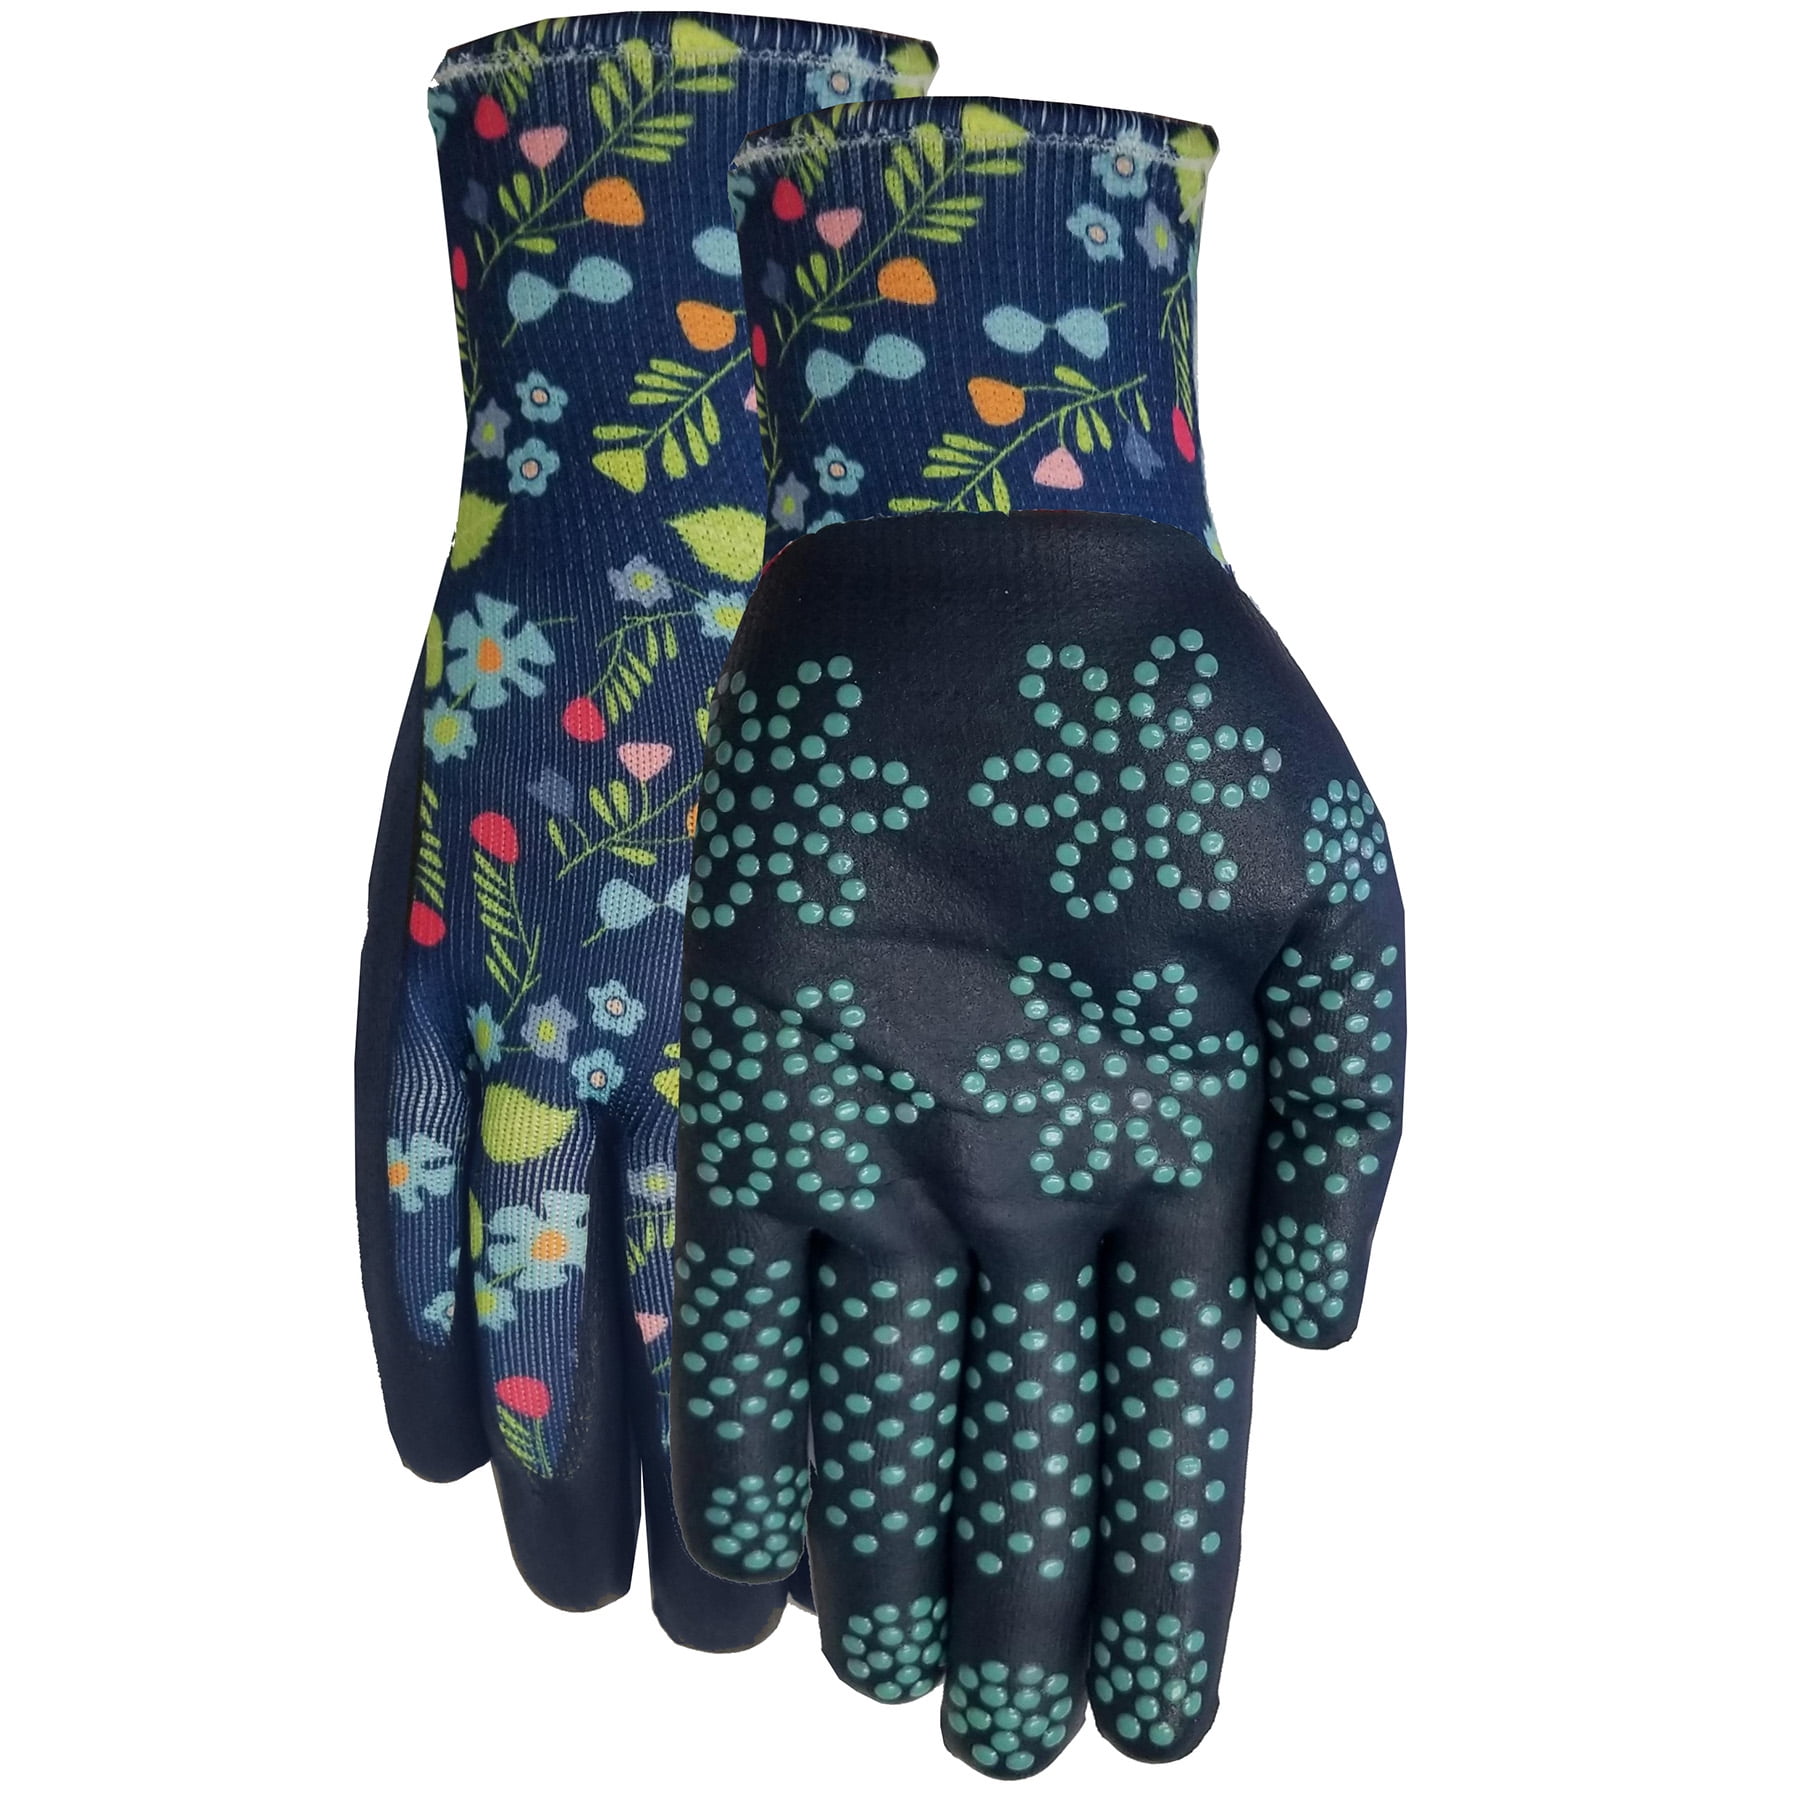 Midwest Gloves & Gear Women's 1 Size Fits All Synthetic Leather Garden Glove 